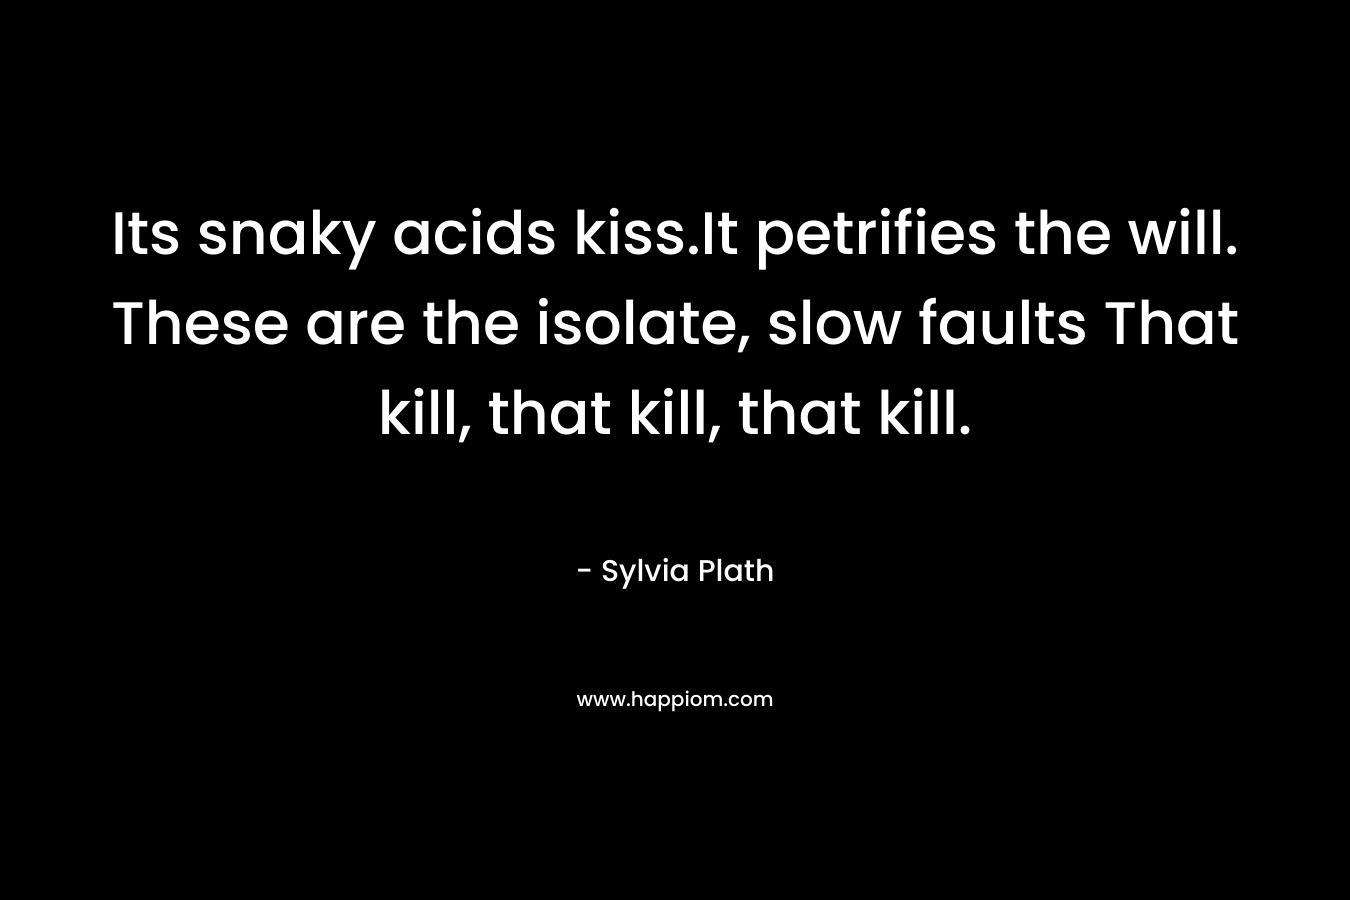 Its snaky acids kiss.It petrifies the will. These are the isolate, slow faults That kill, that kill, that kill.